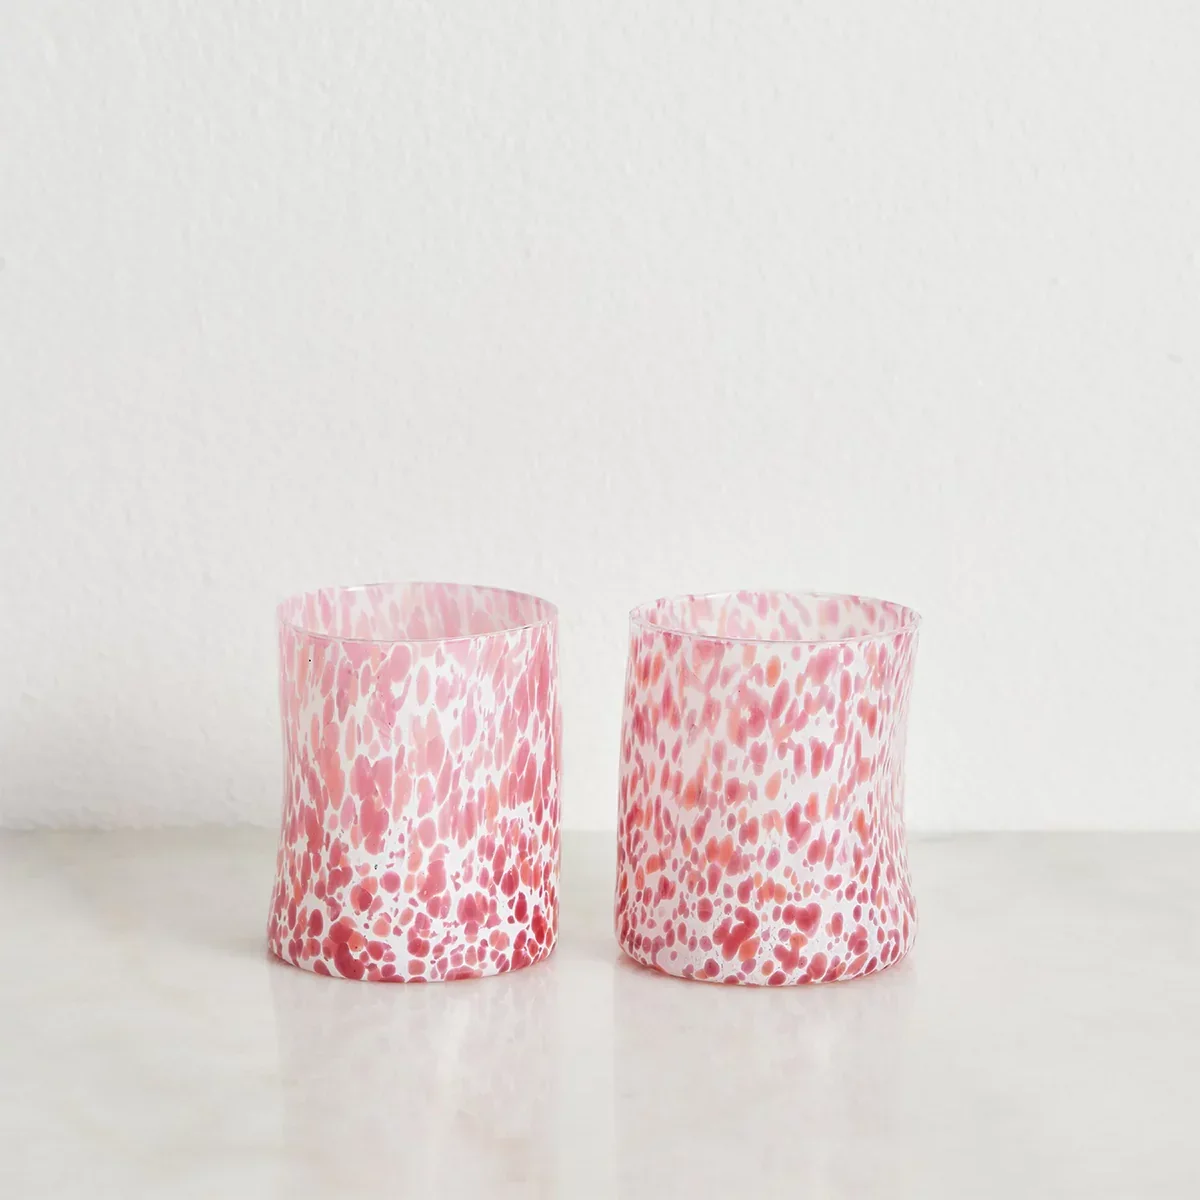 Handblown glasses featuring flecks of soft pink against a white background.